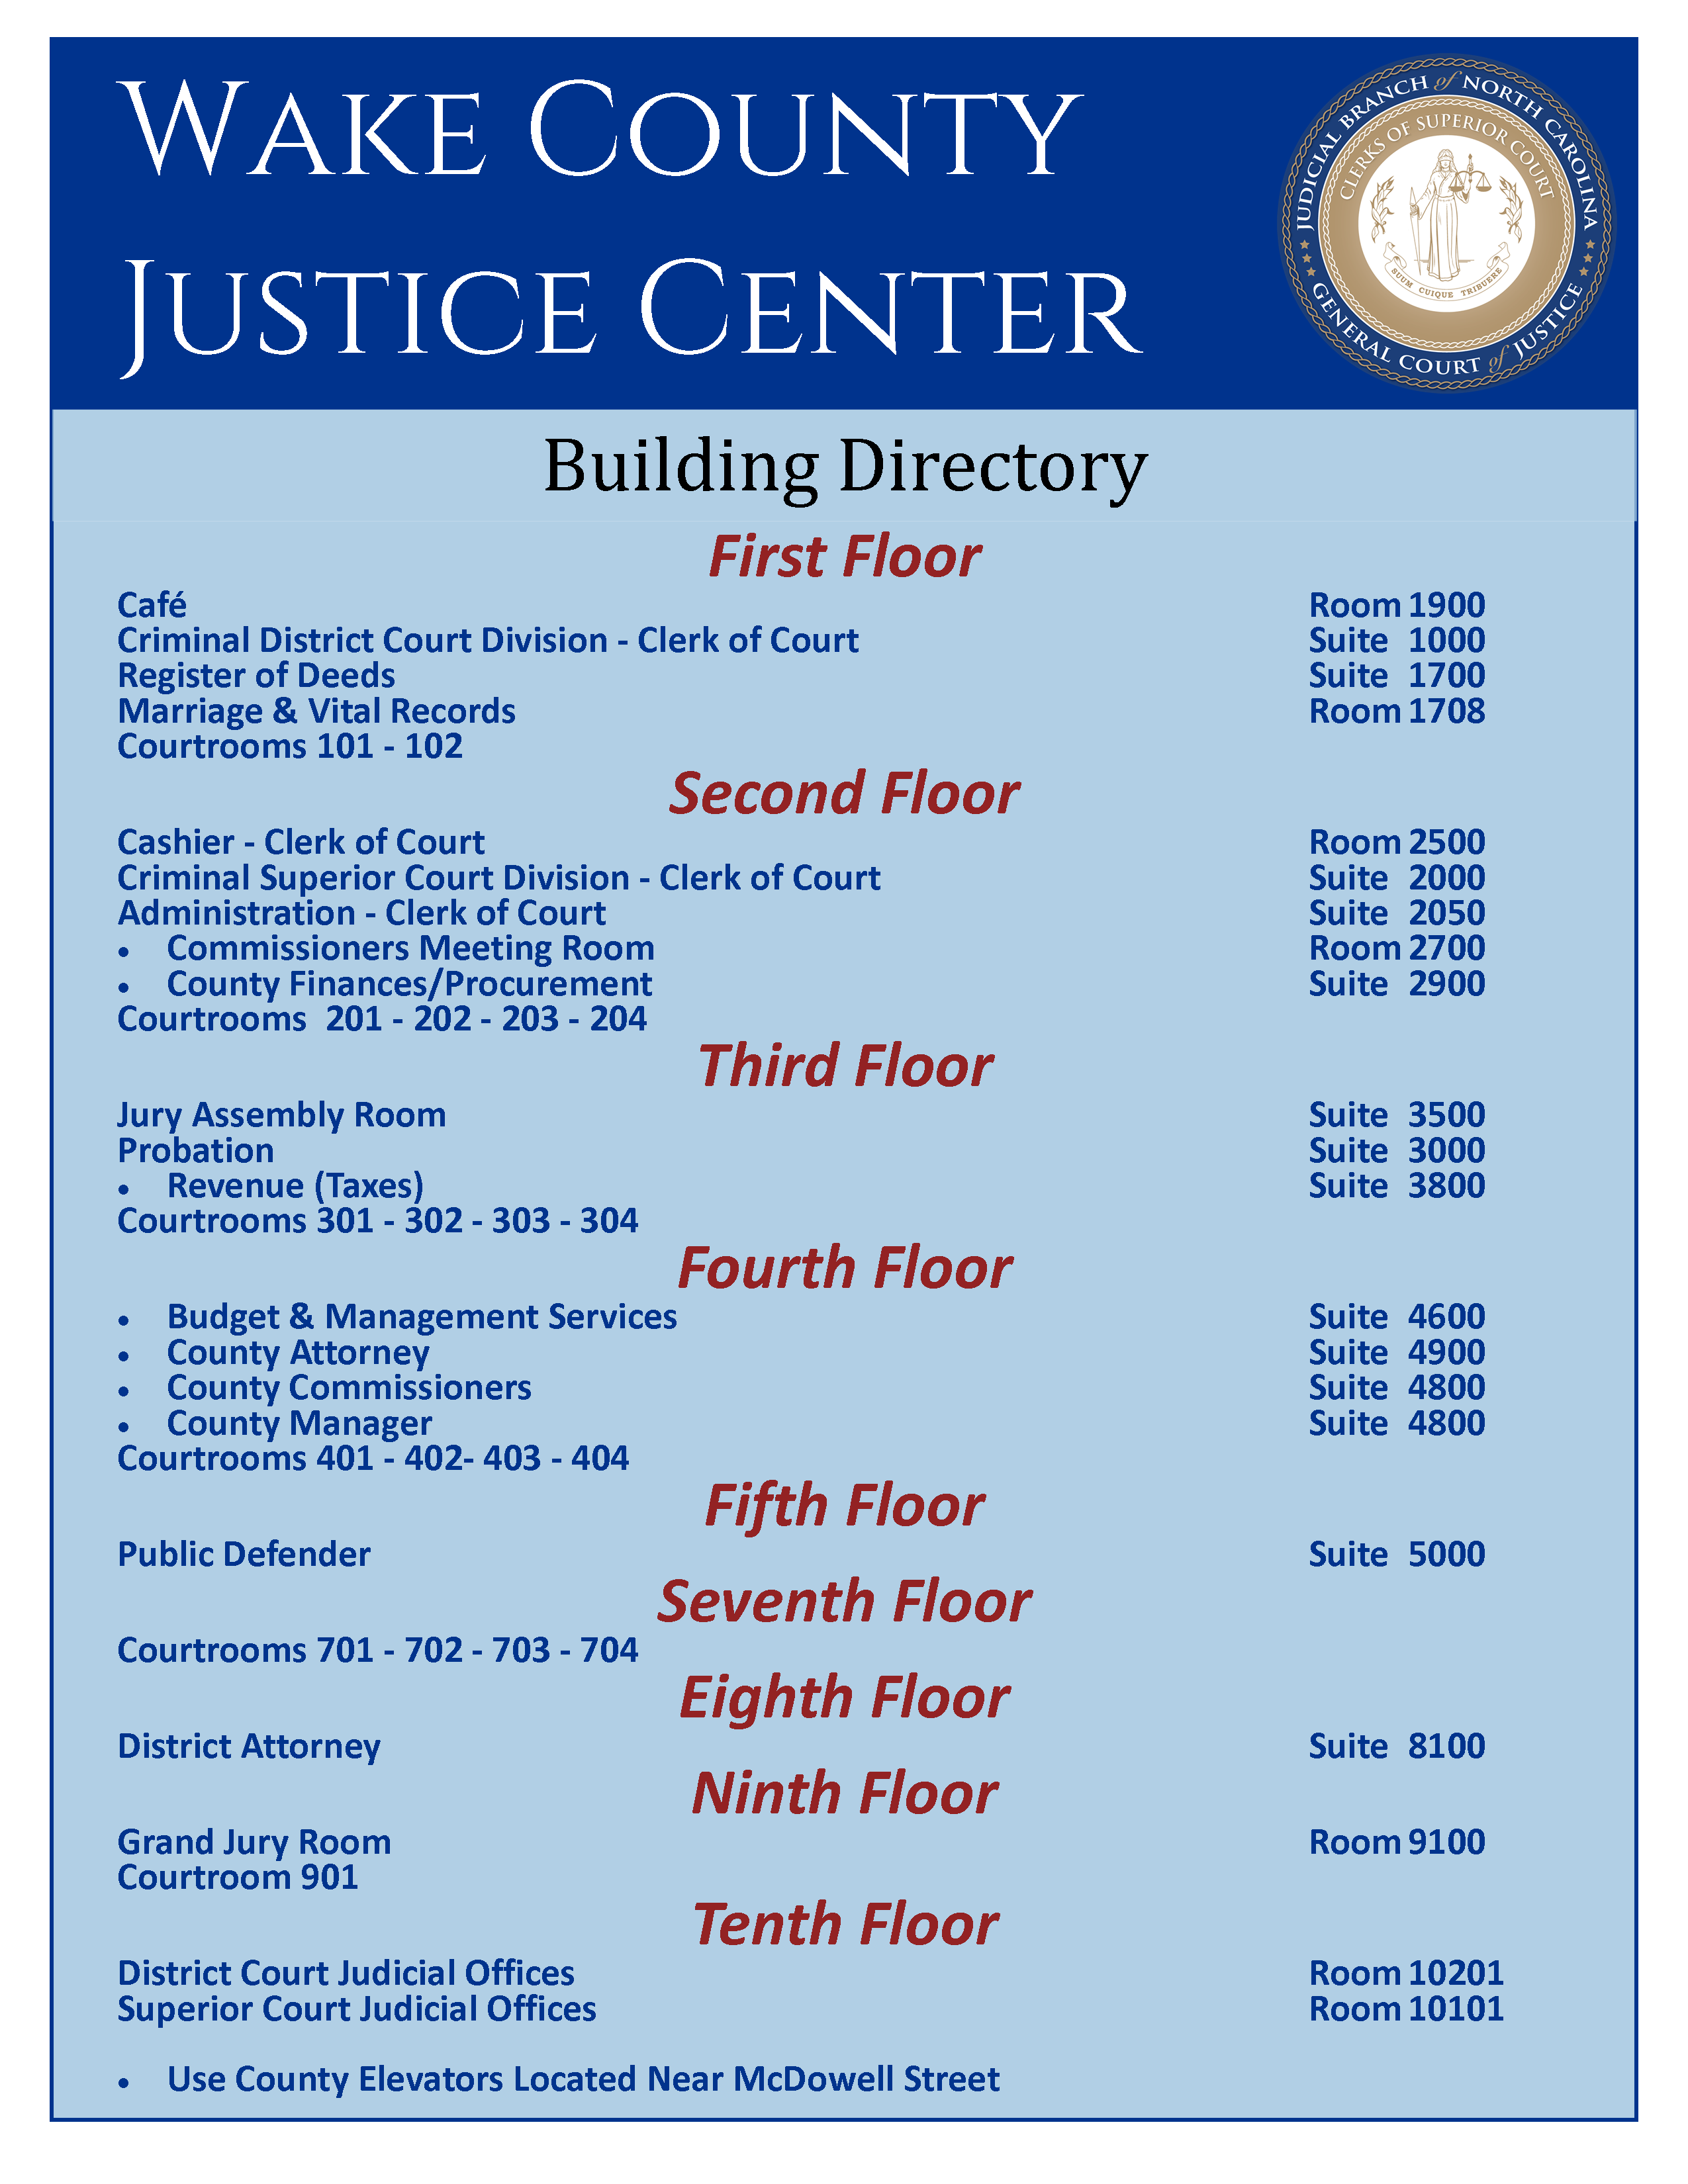 Wake County Justice Center Building Directory